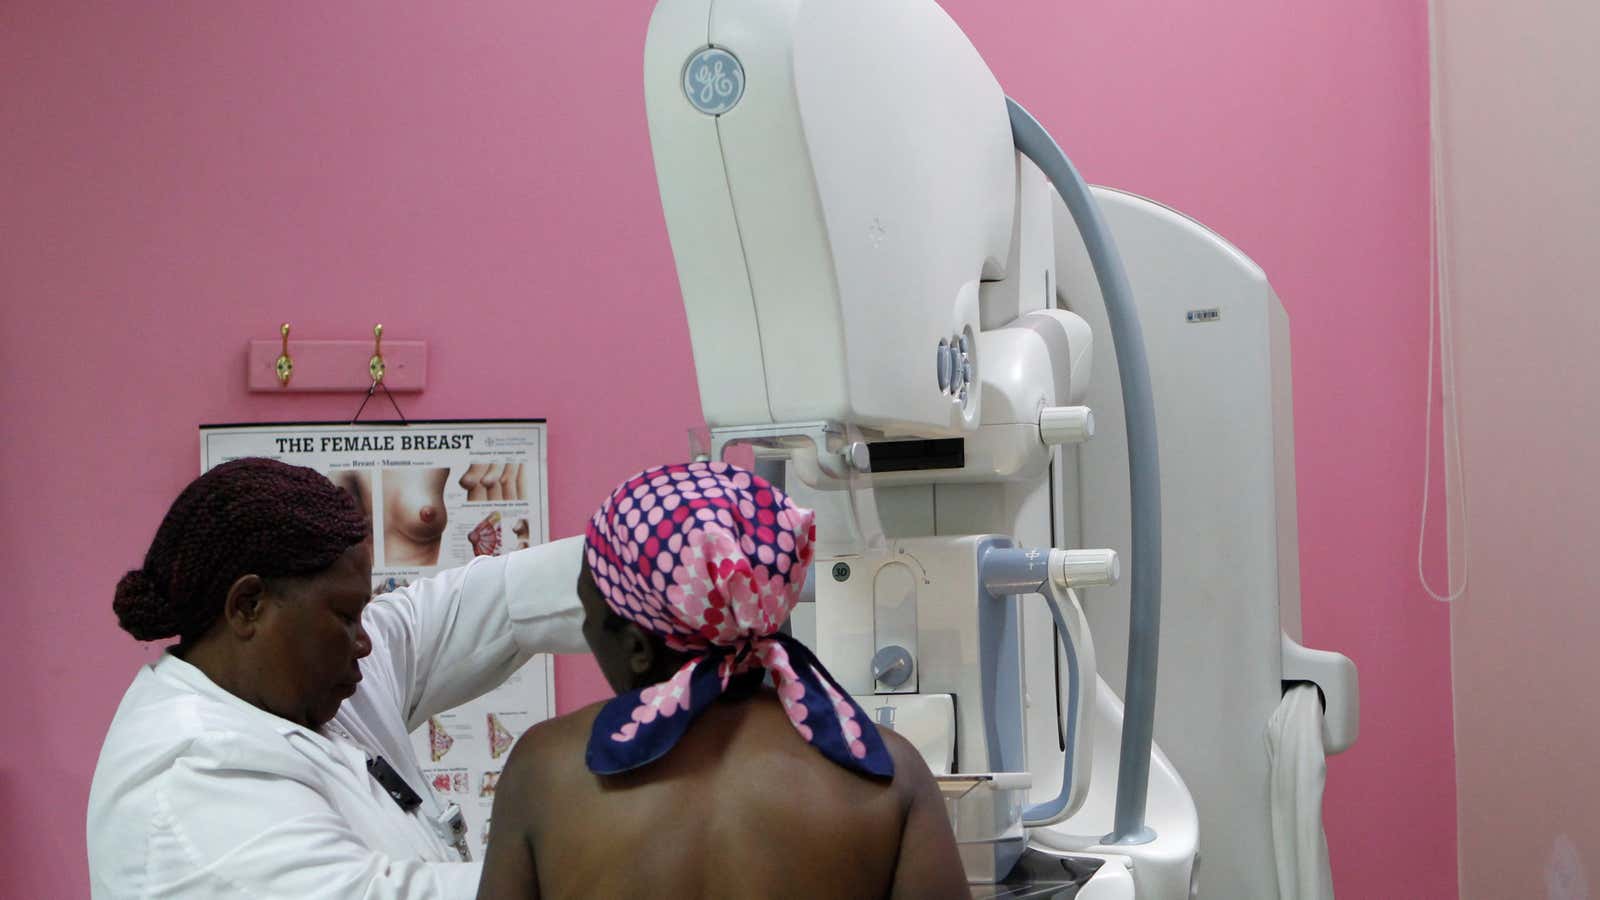 Patients are getting mammograms far less during the pandemic